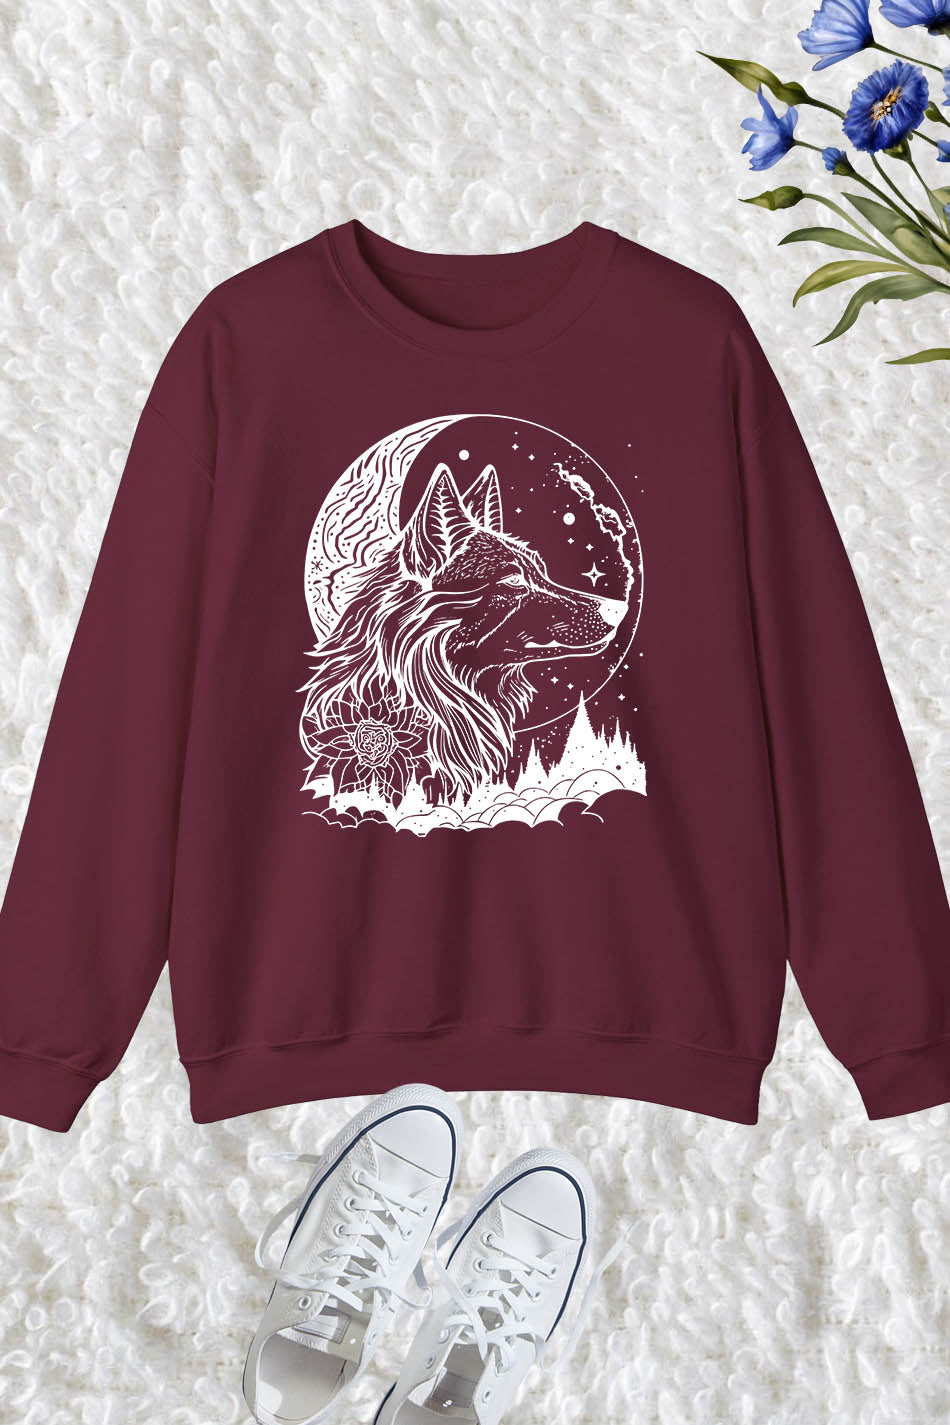 Wolf Face with Full Moon and Flower Sweatshirt